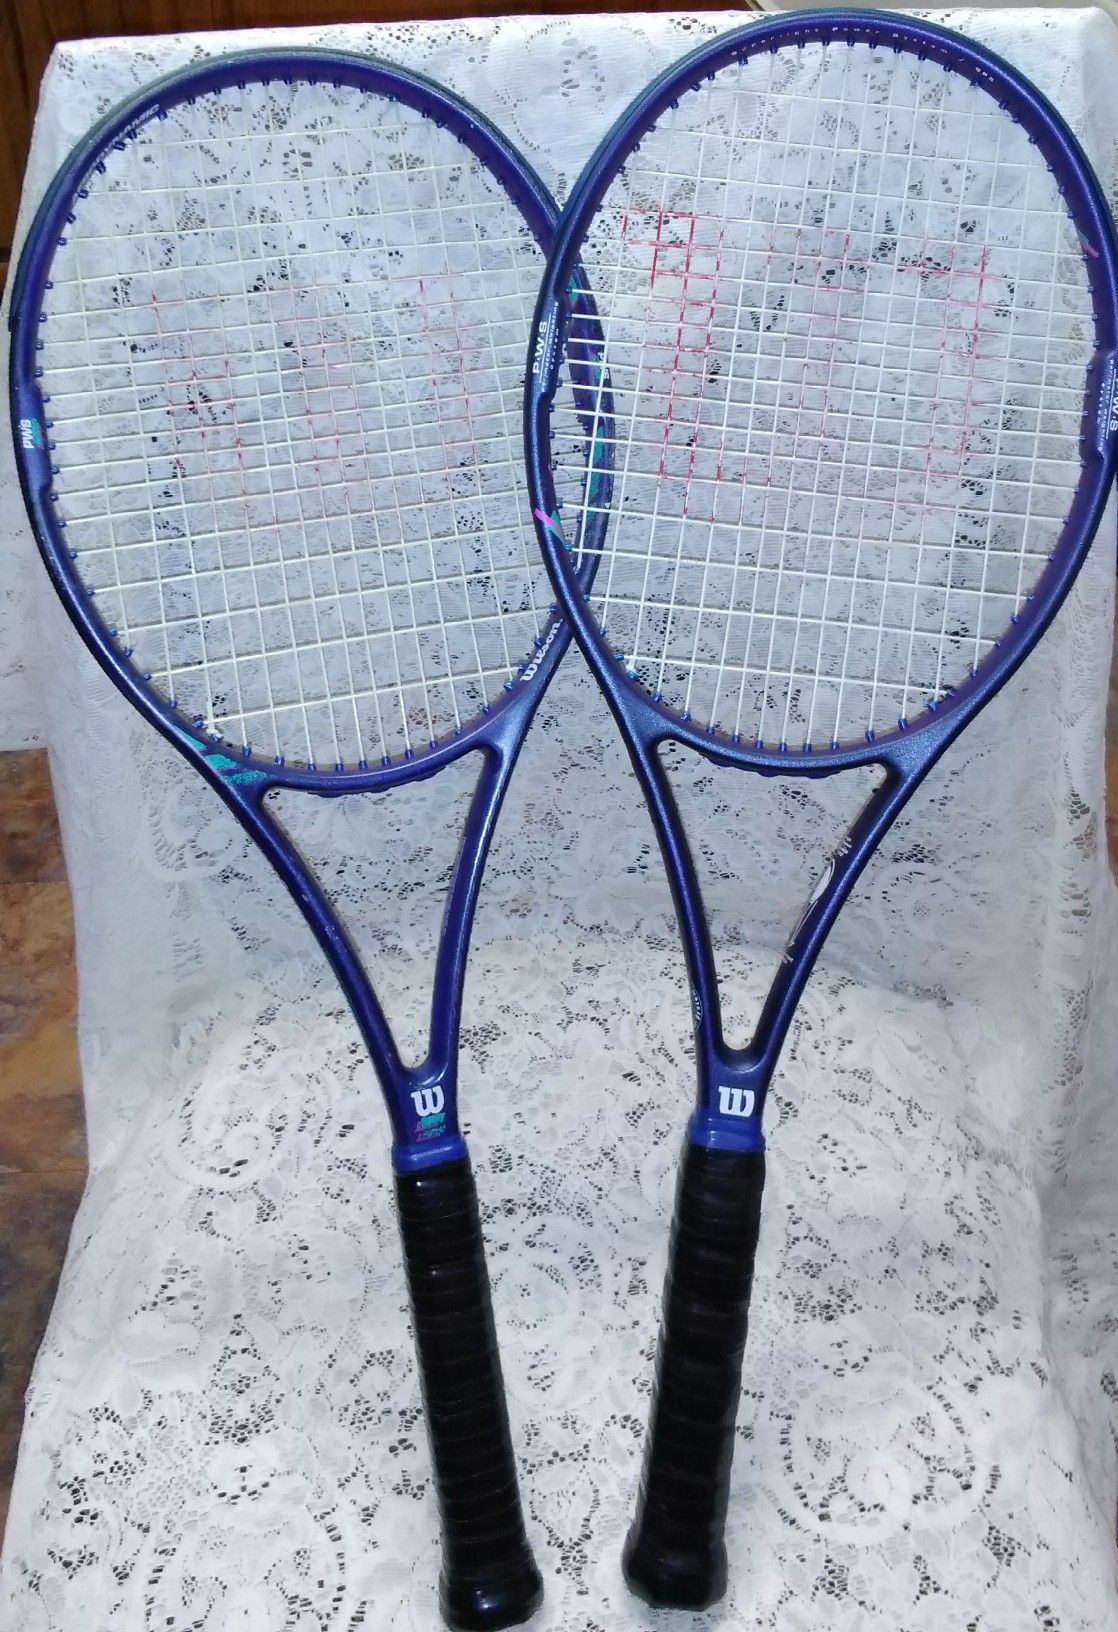 Wilson and Spalding Tennis Rackets